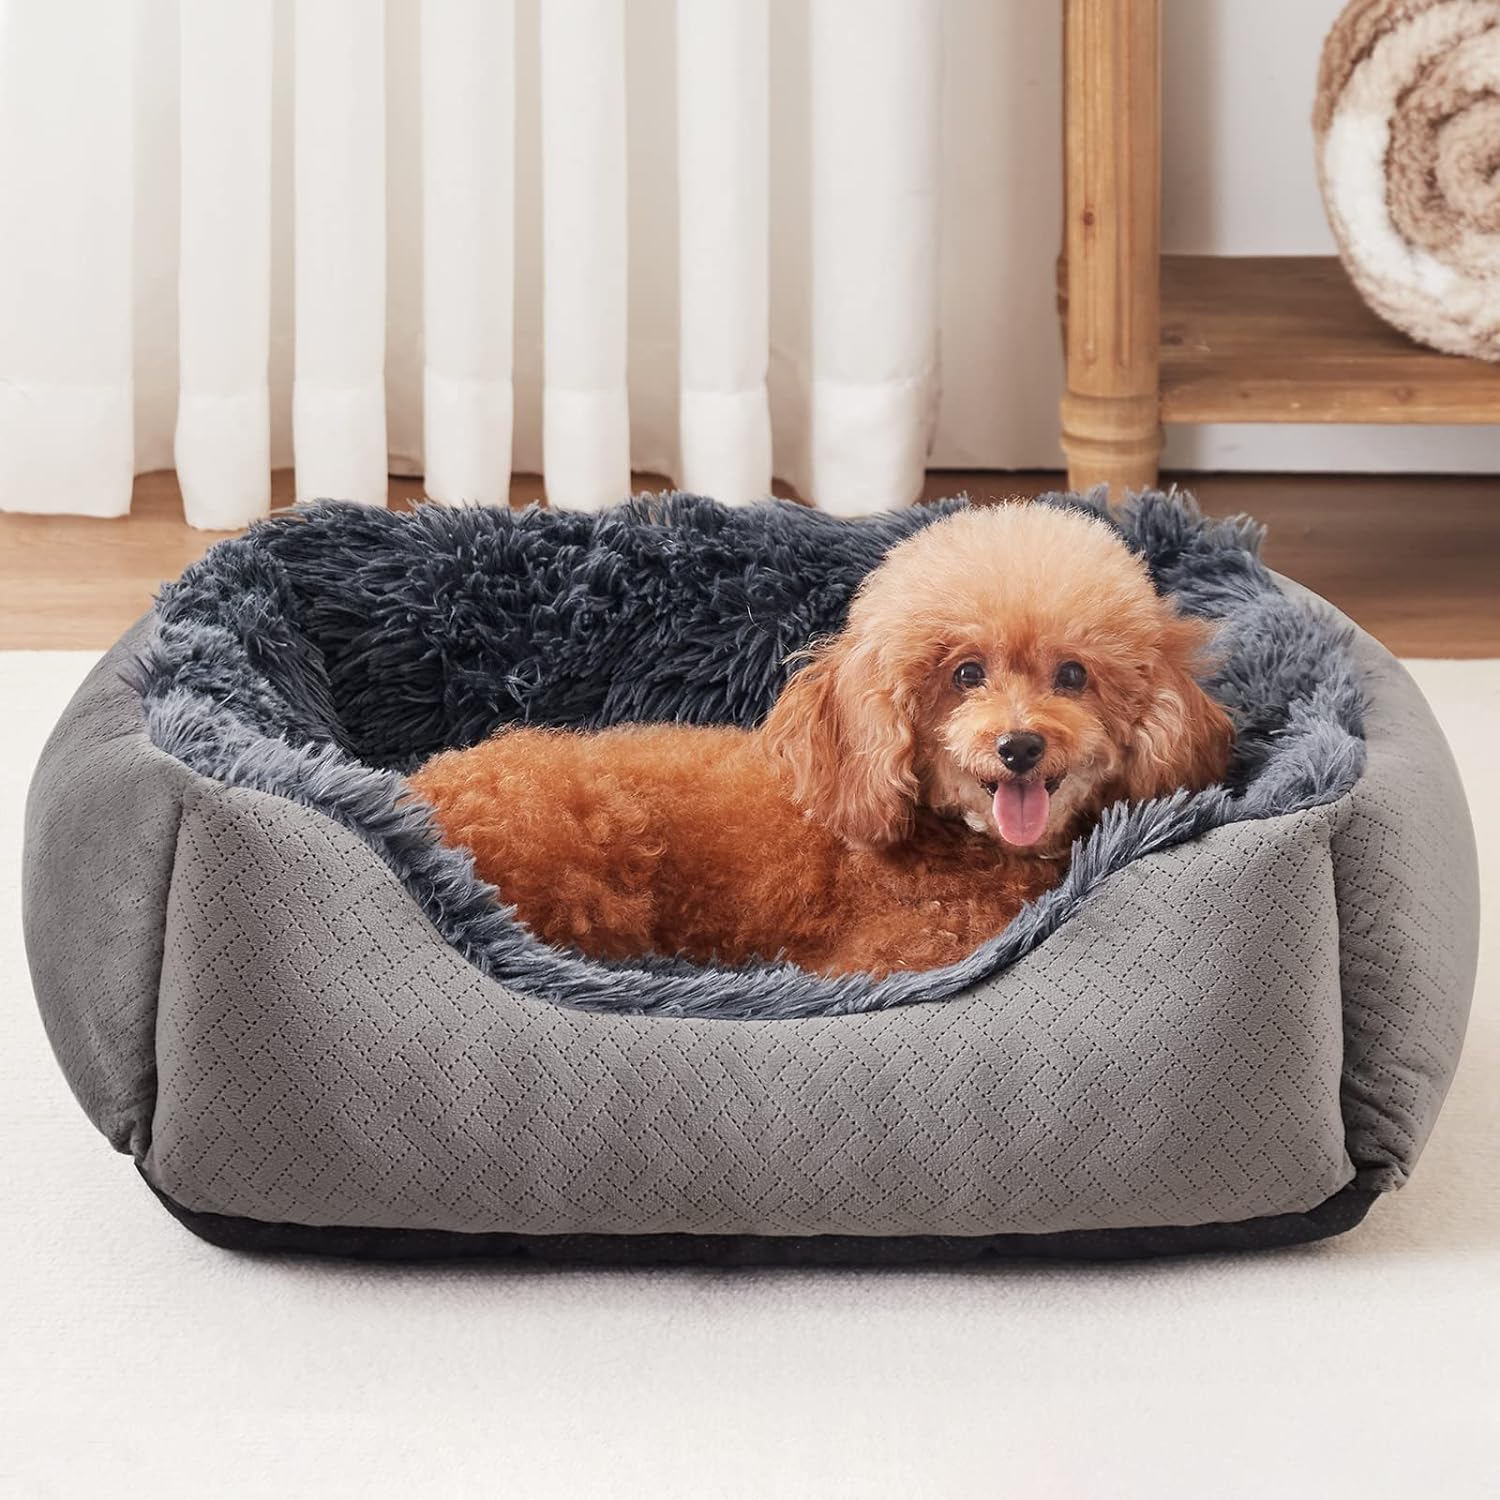 NVENHO Large Dog Bed for Large Medium Small Dogs, Rectangle Washable Dog Bed, Orthopedic Dog Sofa Bed, Durable Plush Pet Bed, Soft Calming Sleeping Puppy Bed with Anti-Slip Bottom L(30x24x9)